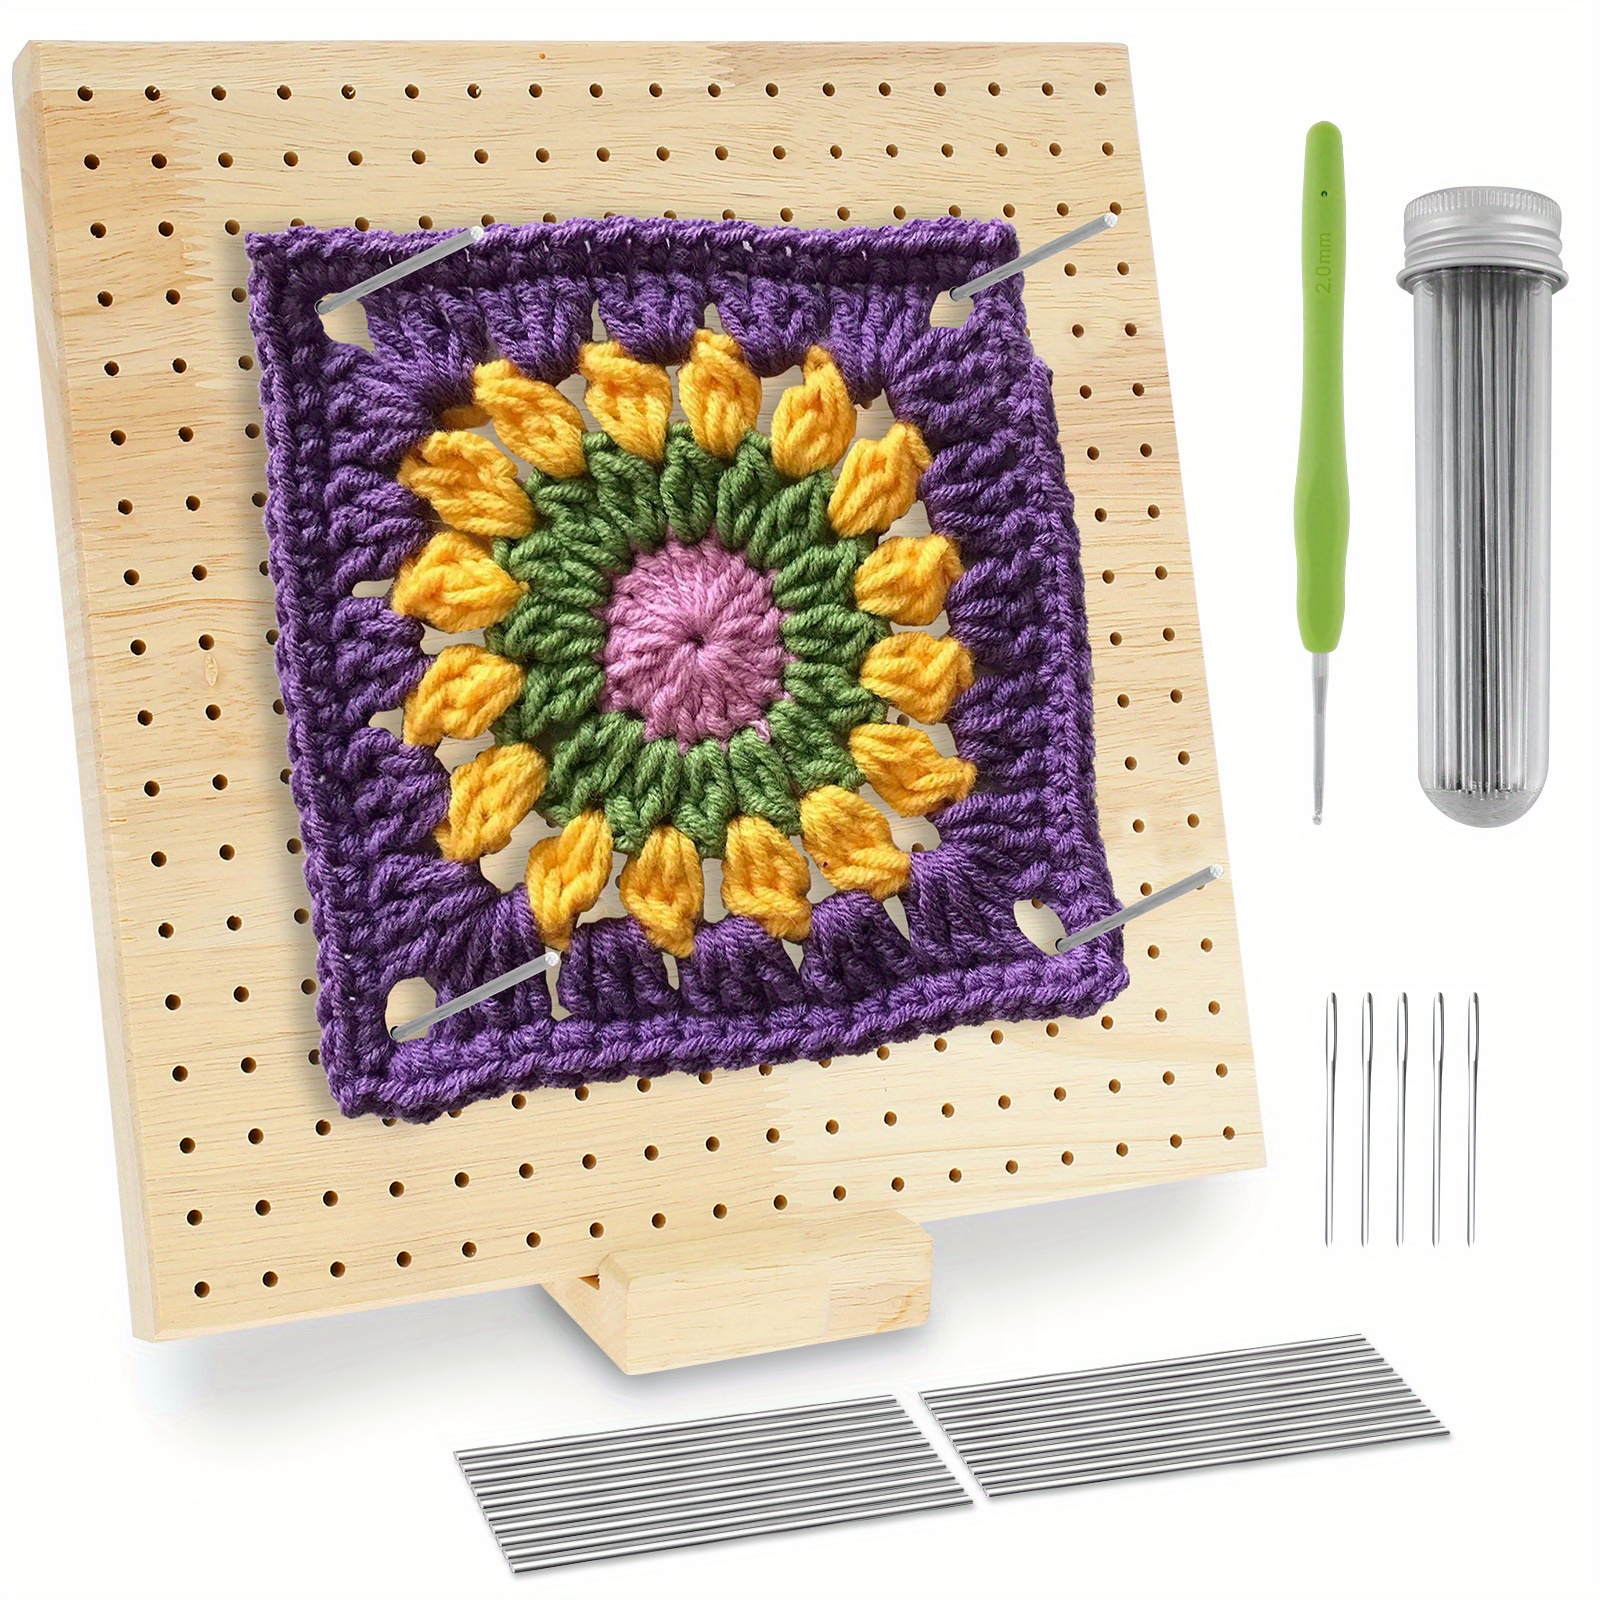 Handcrafted Wooden Blocking Board, Crochet Kits For Beginners Adults, Wooden Blocking Mat For Knitting With 20 Stainless Steel Pins And Pin  Holder T